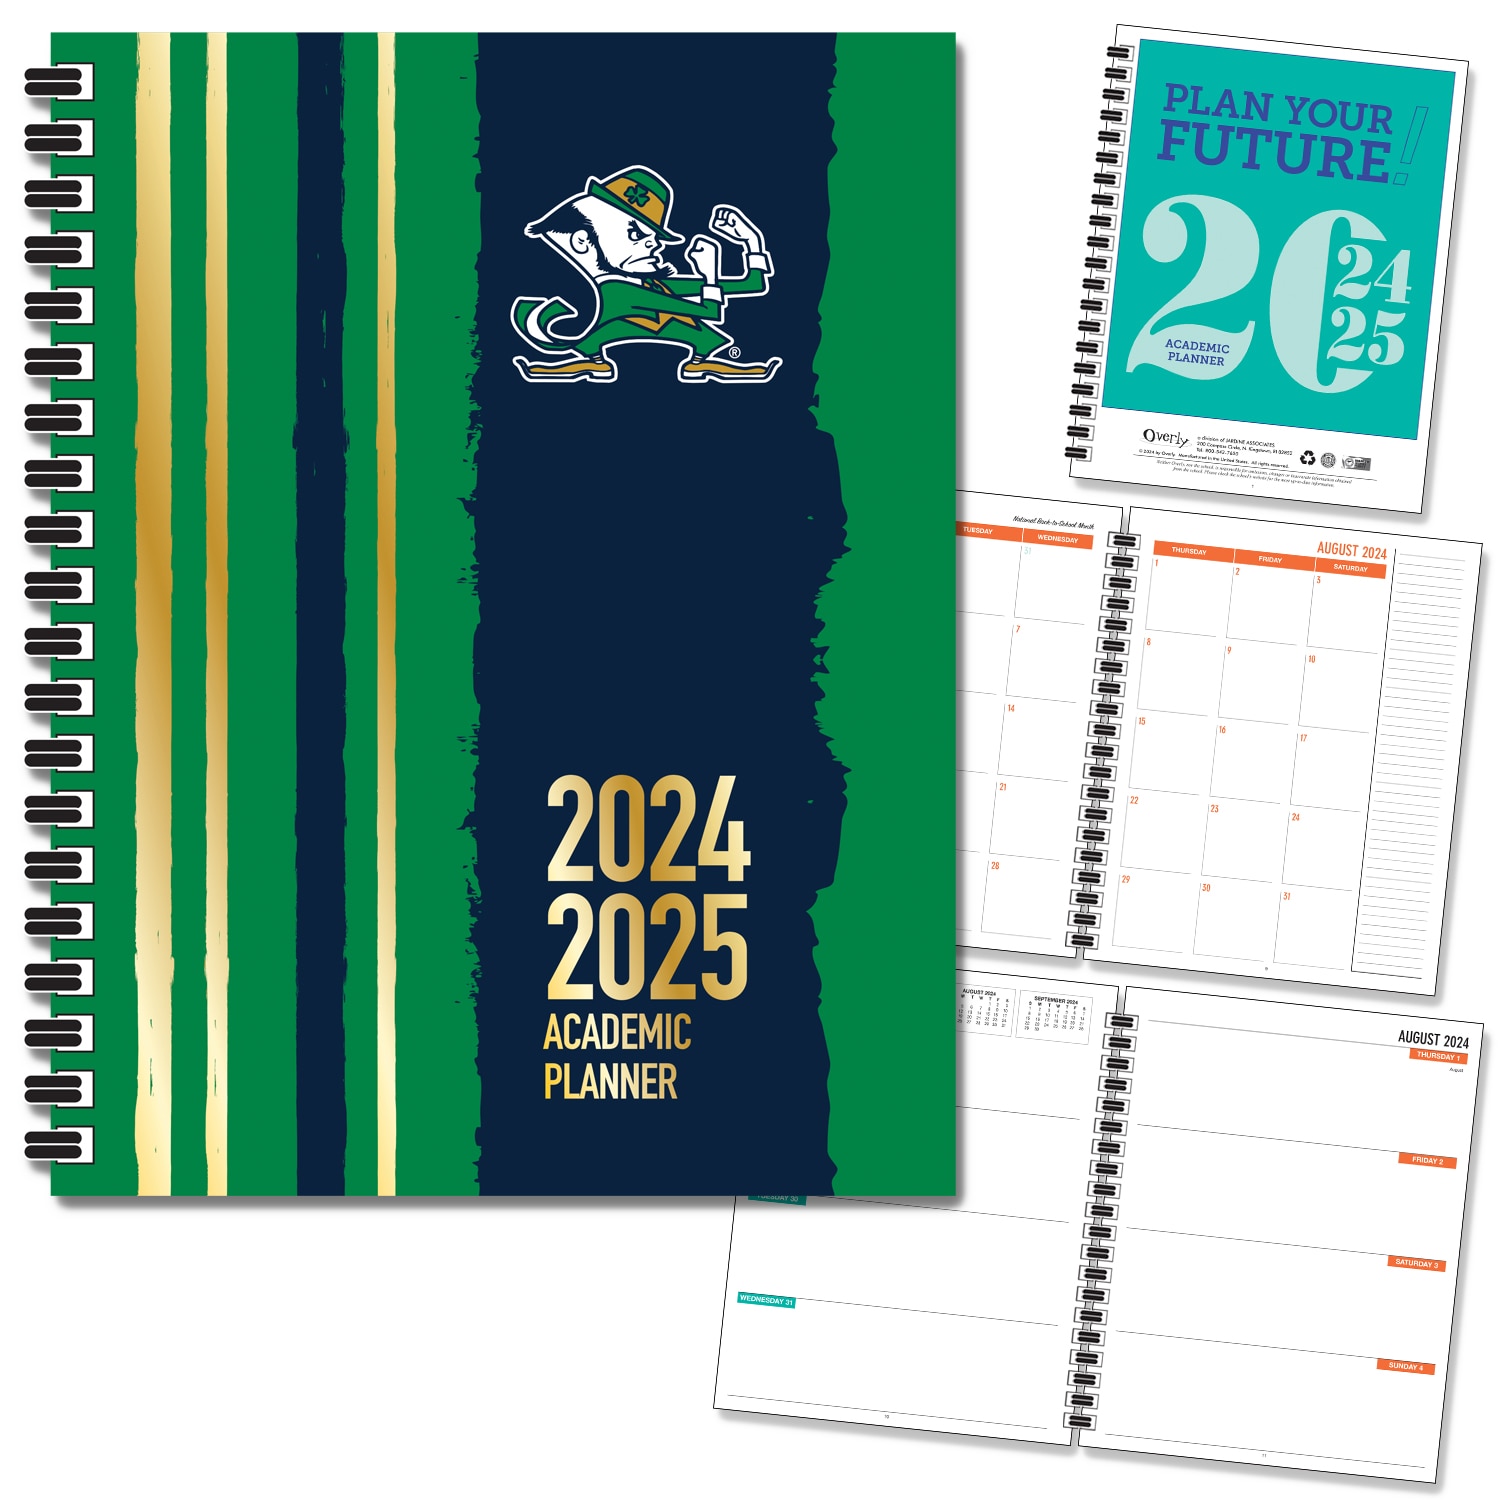 FY 25 ND Spirit Soft Touch Foil - Mascot Imprinted Planner 24-25 AY 7x9